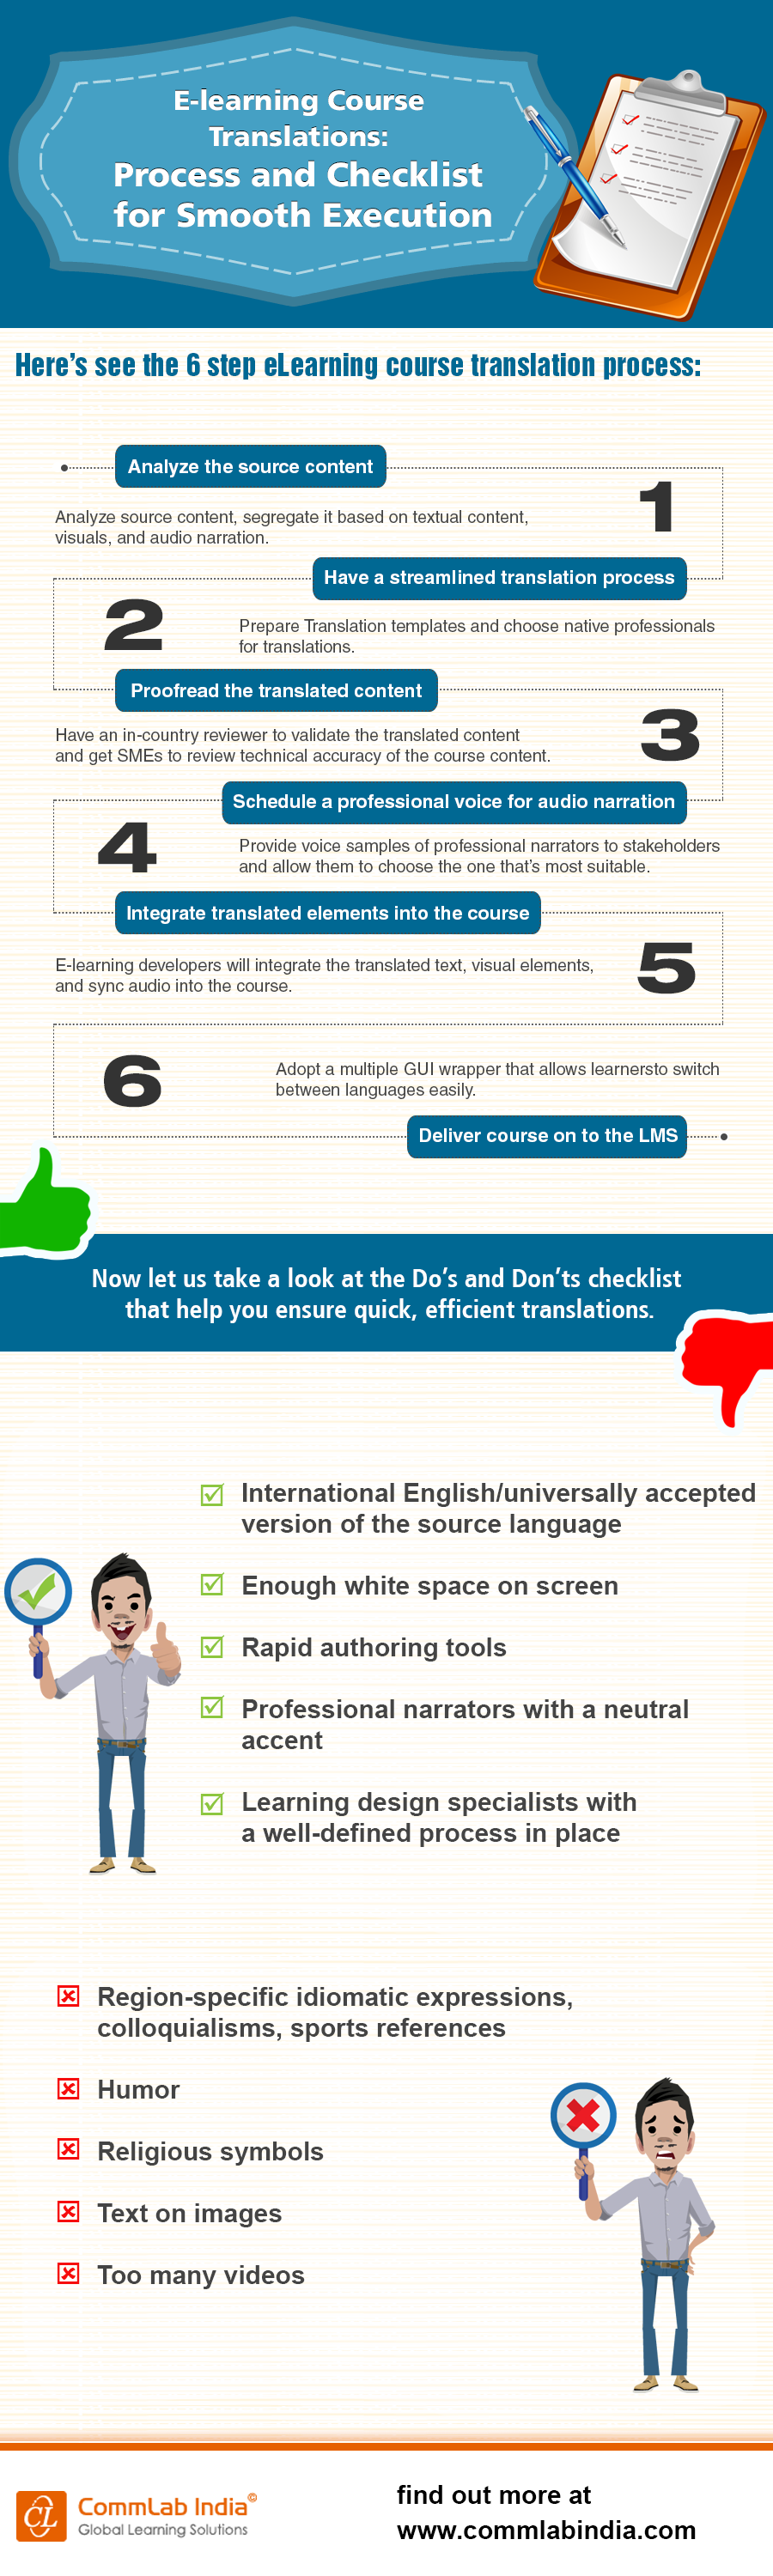 E-learning Course Translations: Process and Checklist for Smooth Execution [Infographic]